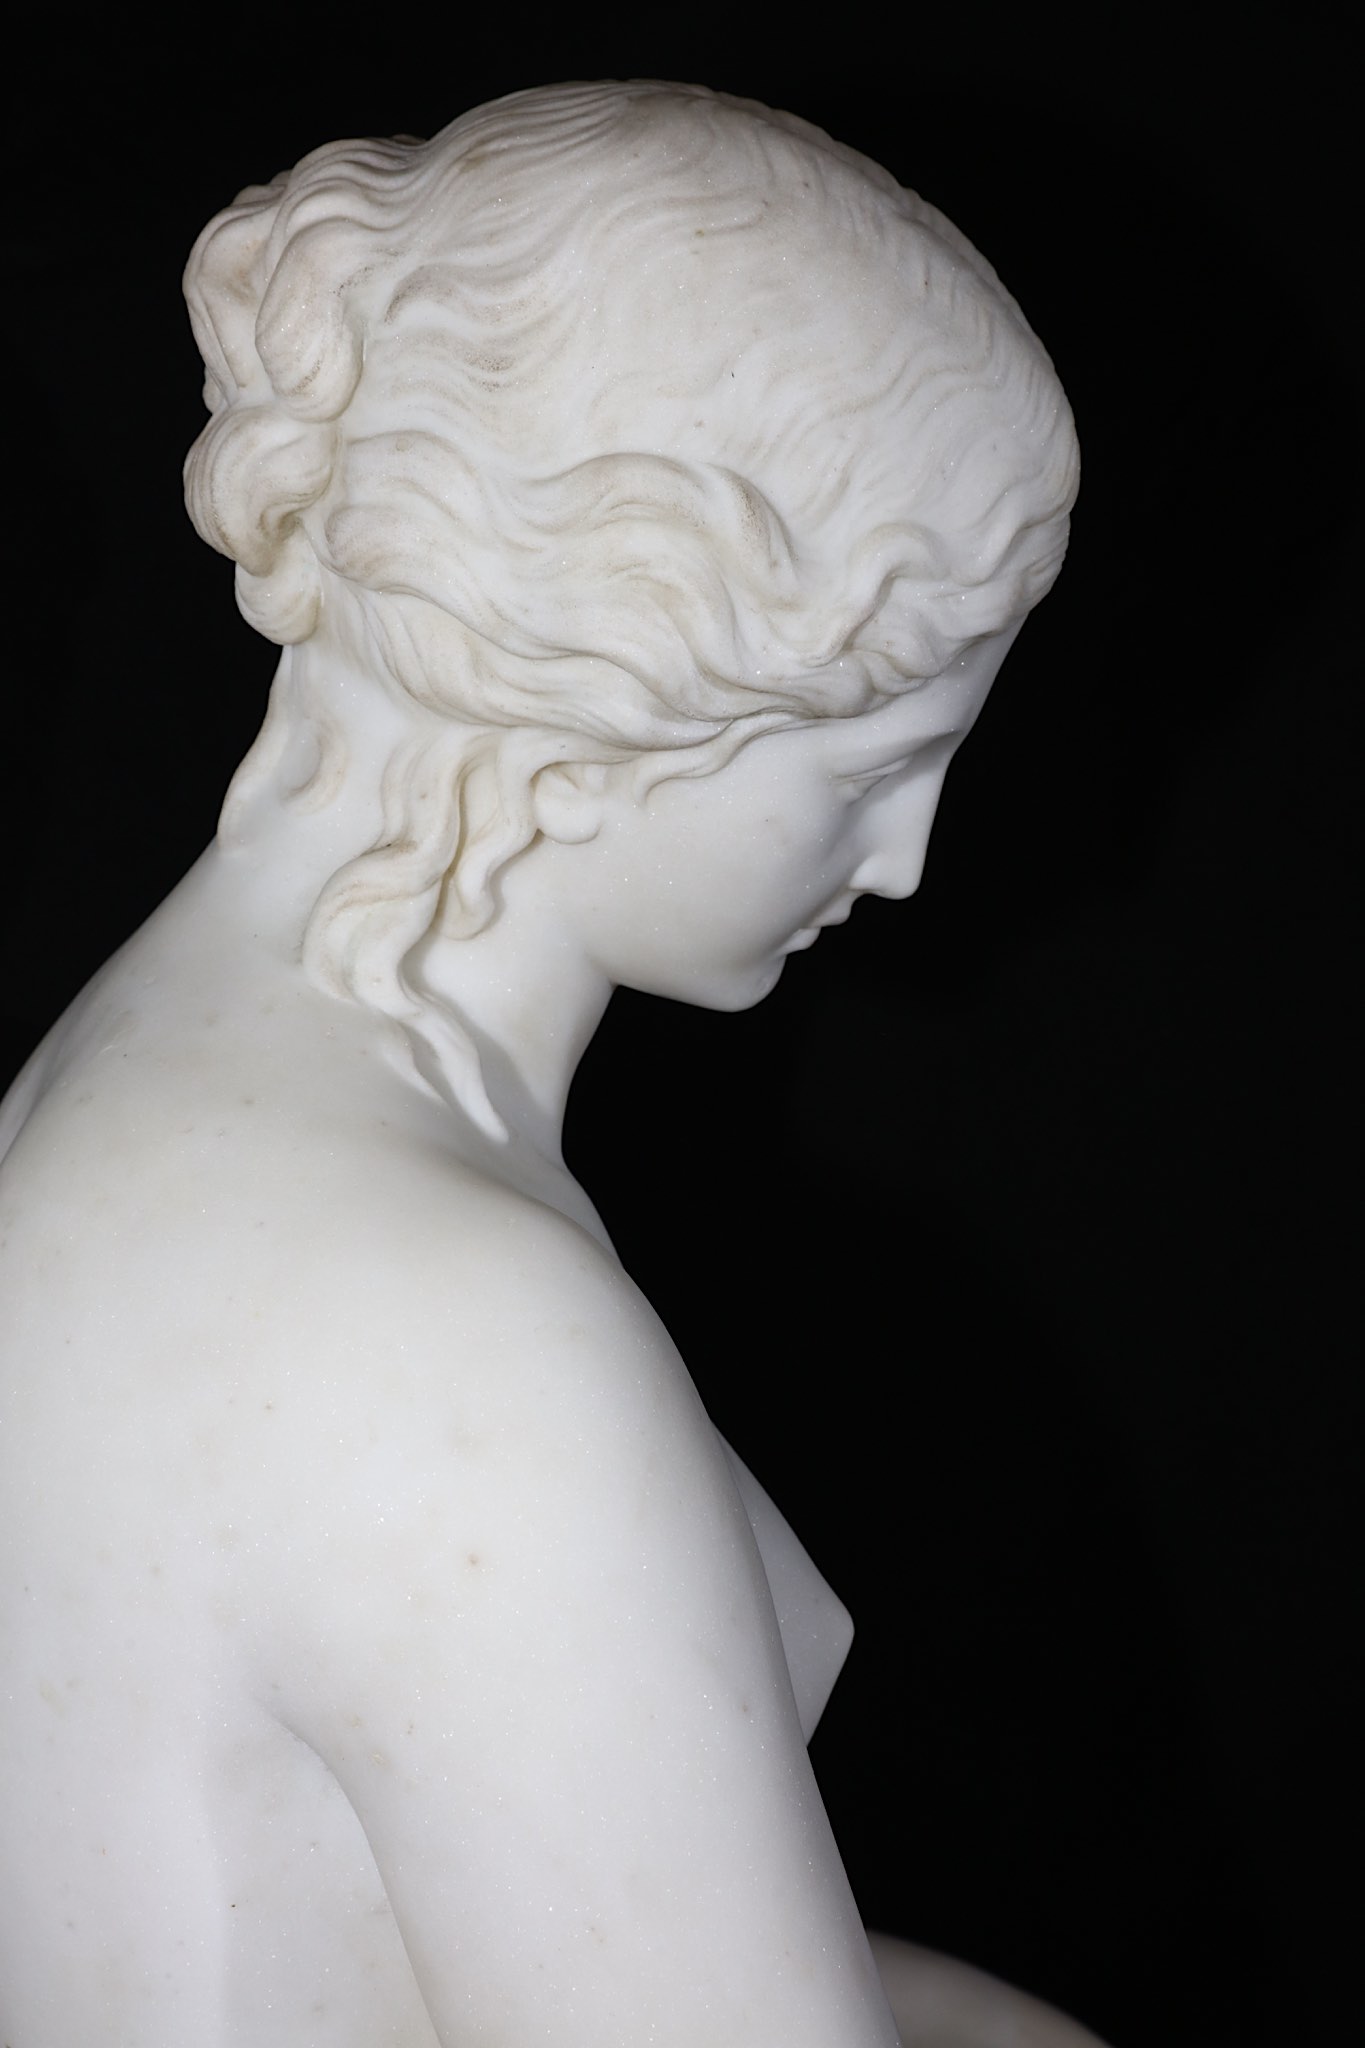 HOLME-CARDWELL (BRITISH, 1813-1895): A LARGE MARBLE FIGURE OF DIANA ABOUT TO BATHE the nude figure - Image 5 of 7